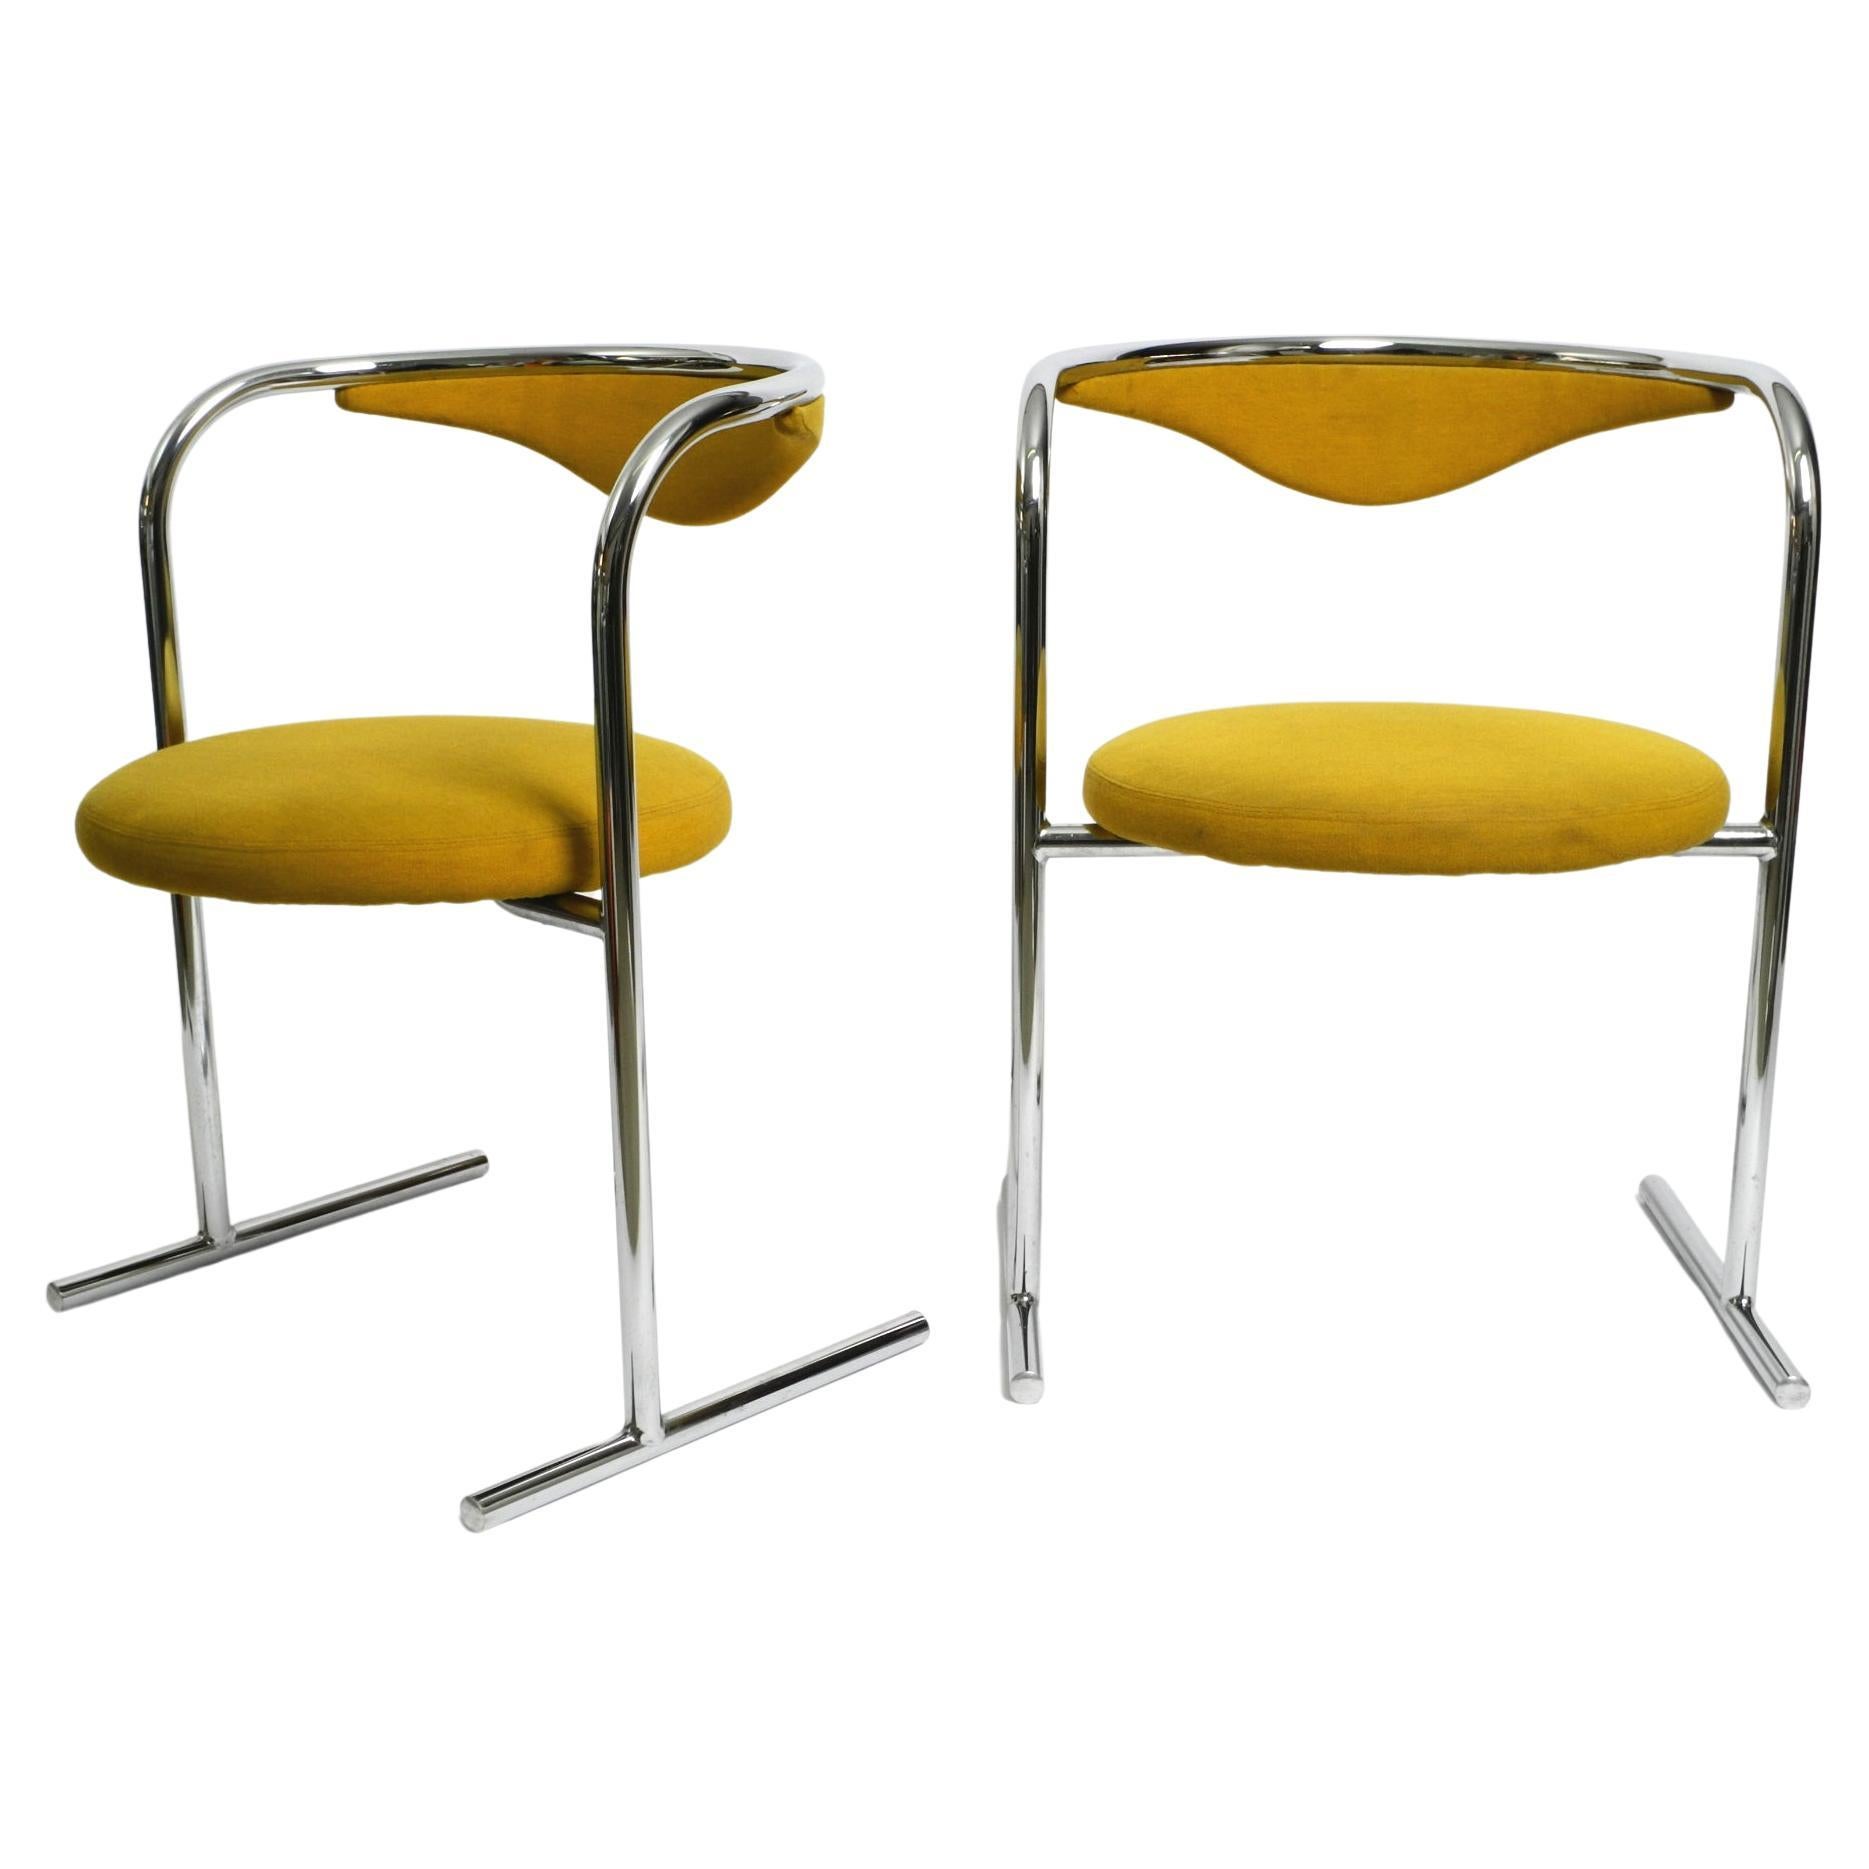 What is a Thonet chair?